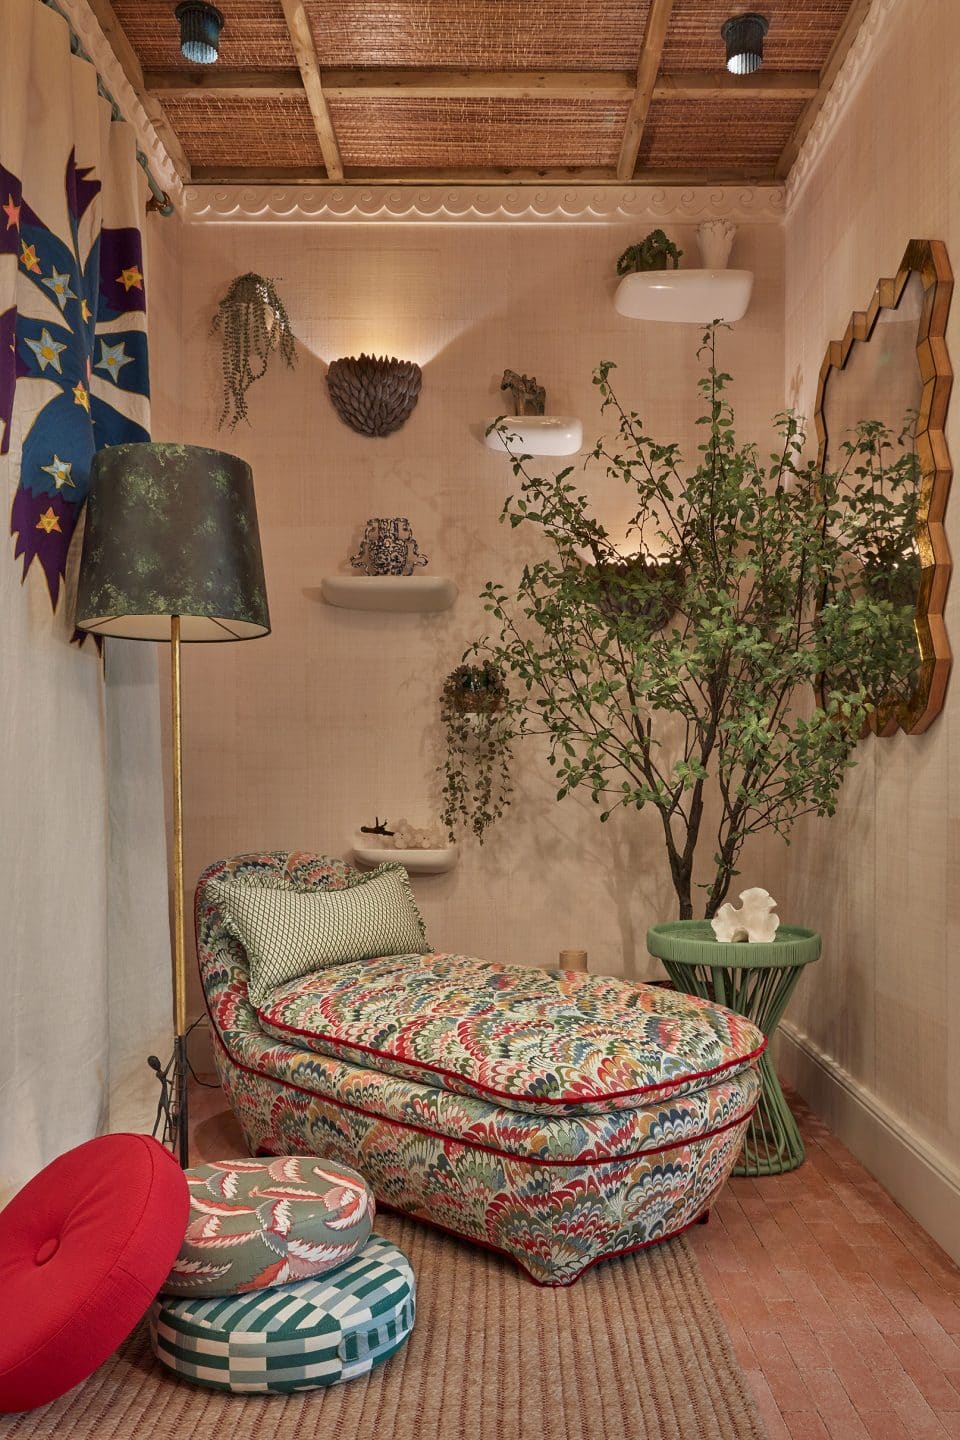 How Britain’s Top Decorators Wowed Design Fans in London This Summer 